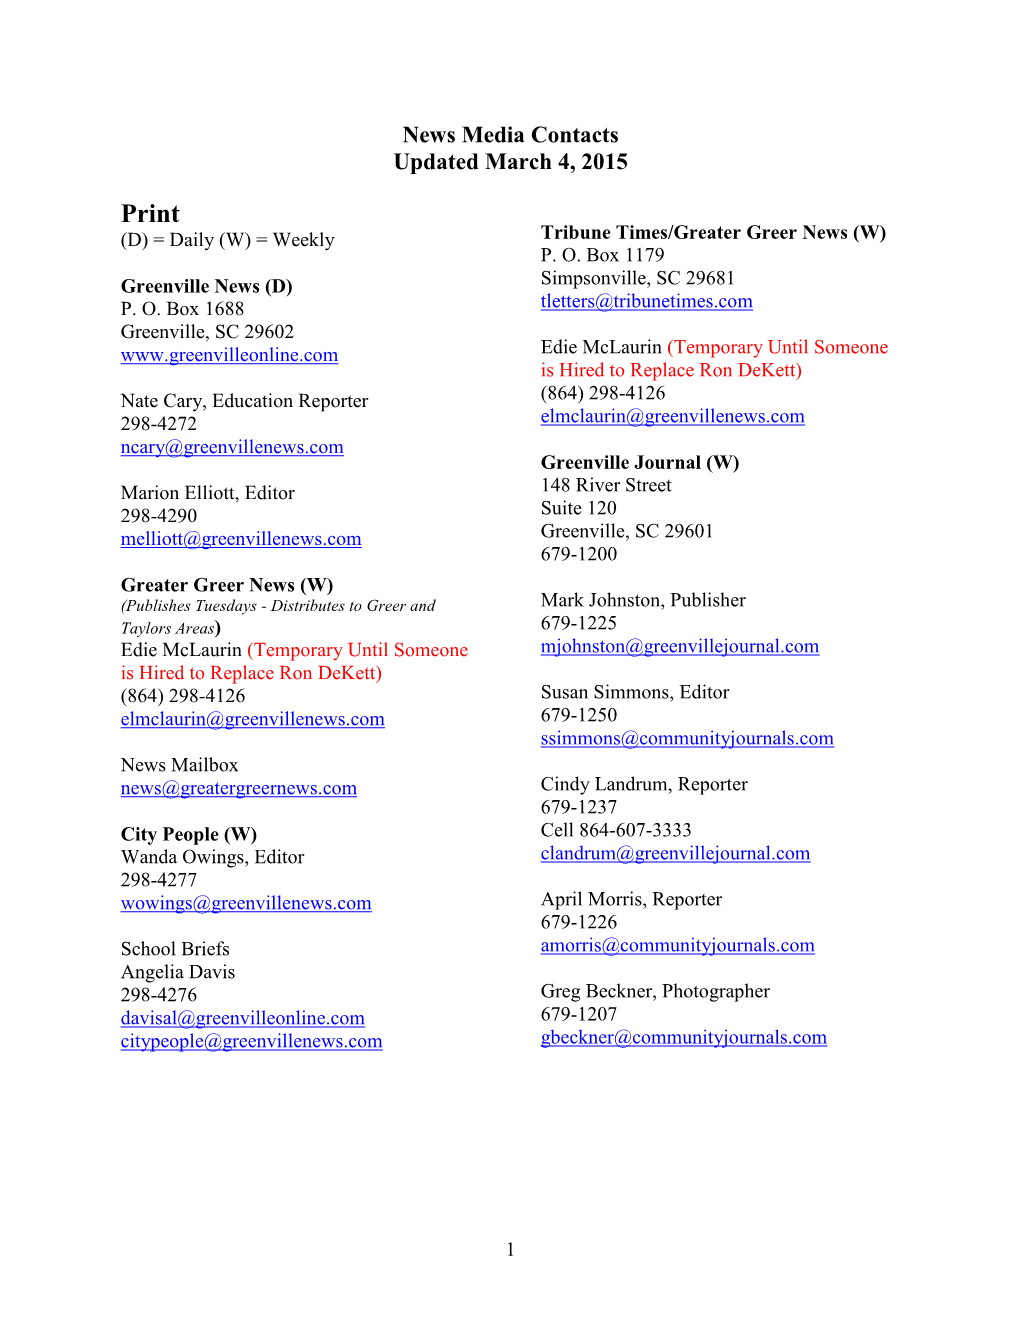 News Media Contacts Updated March 4, 2015